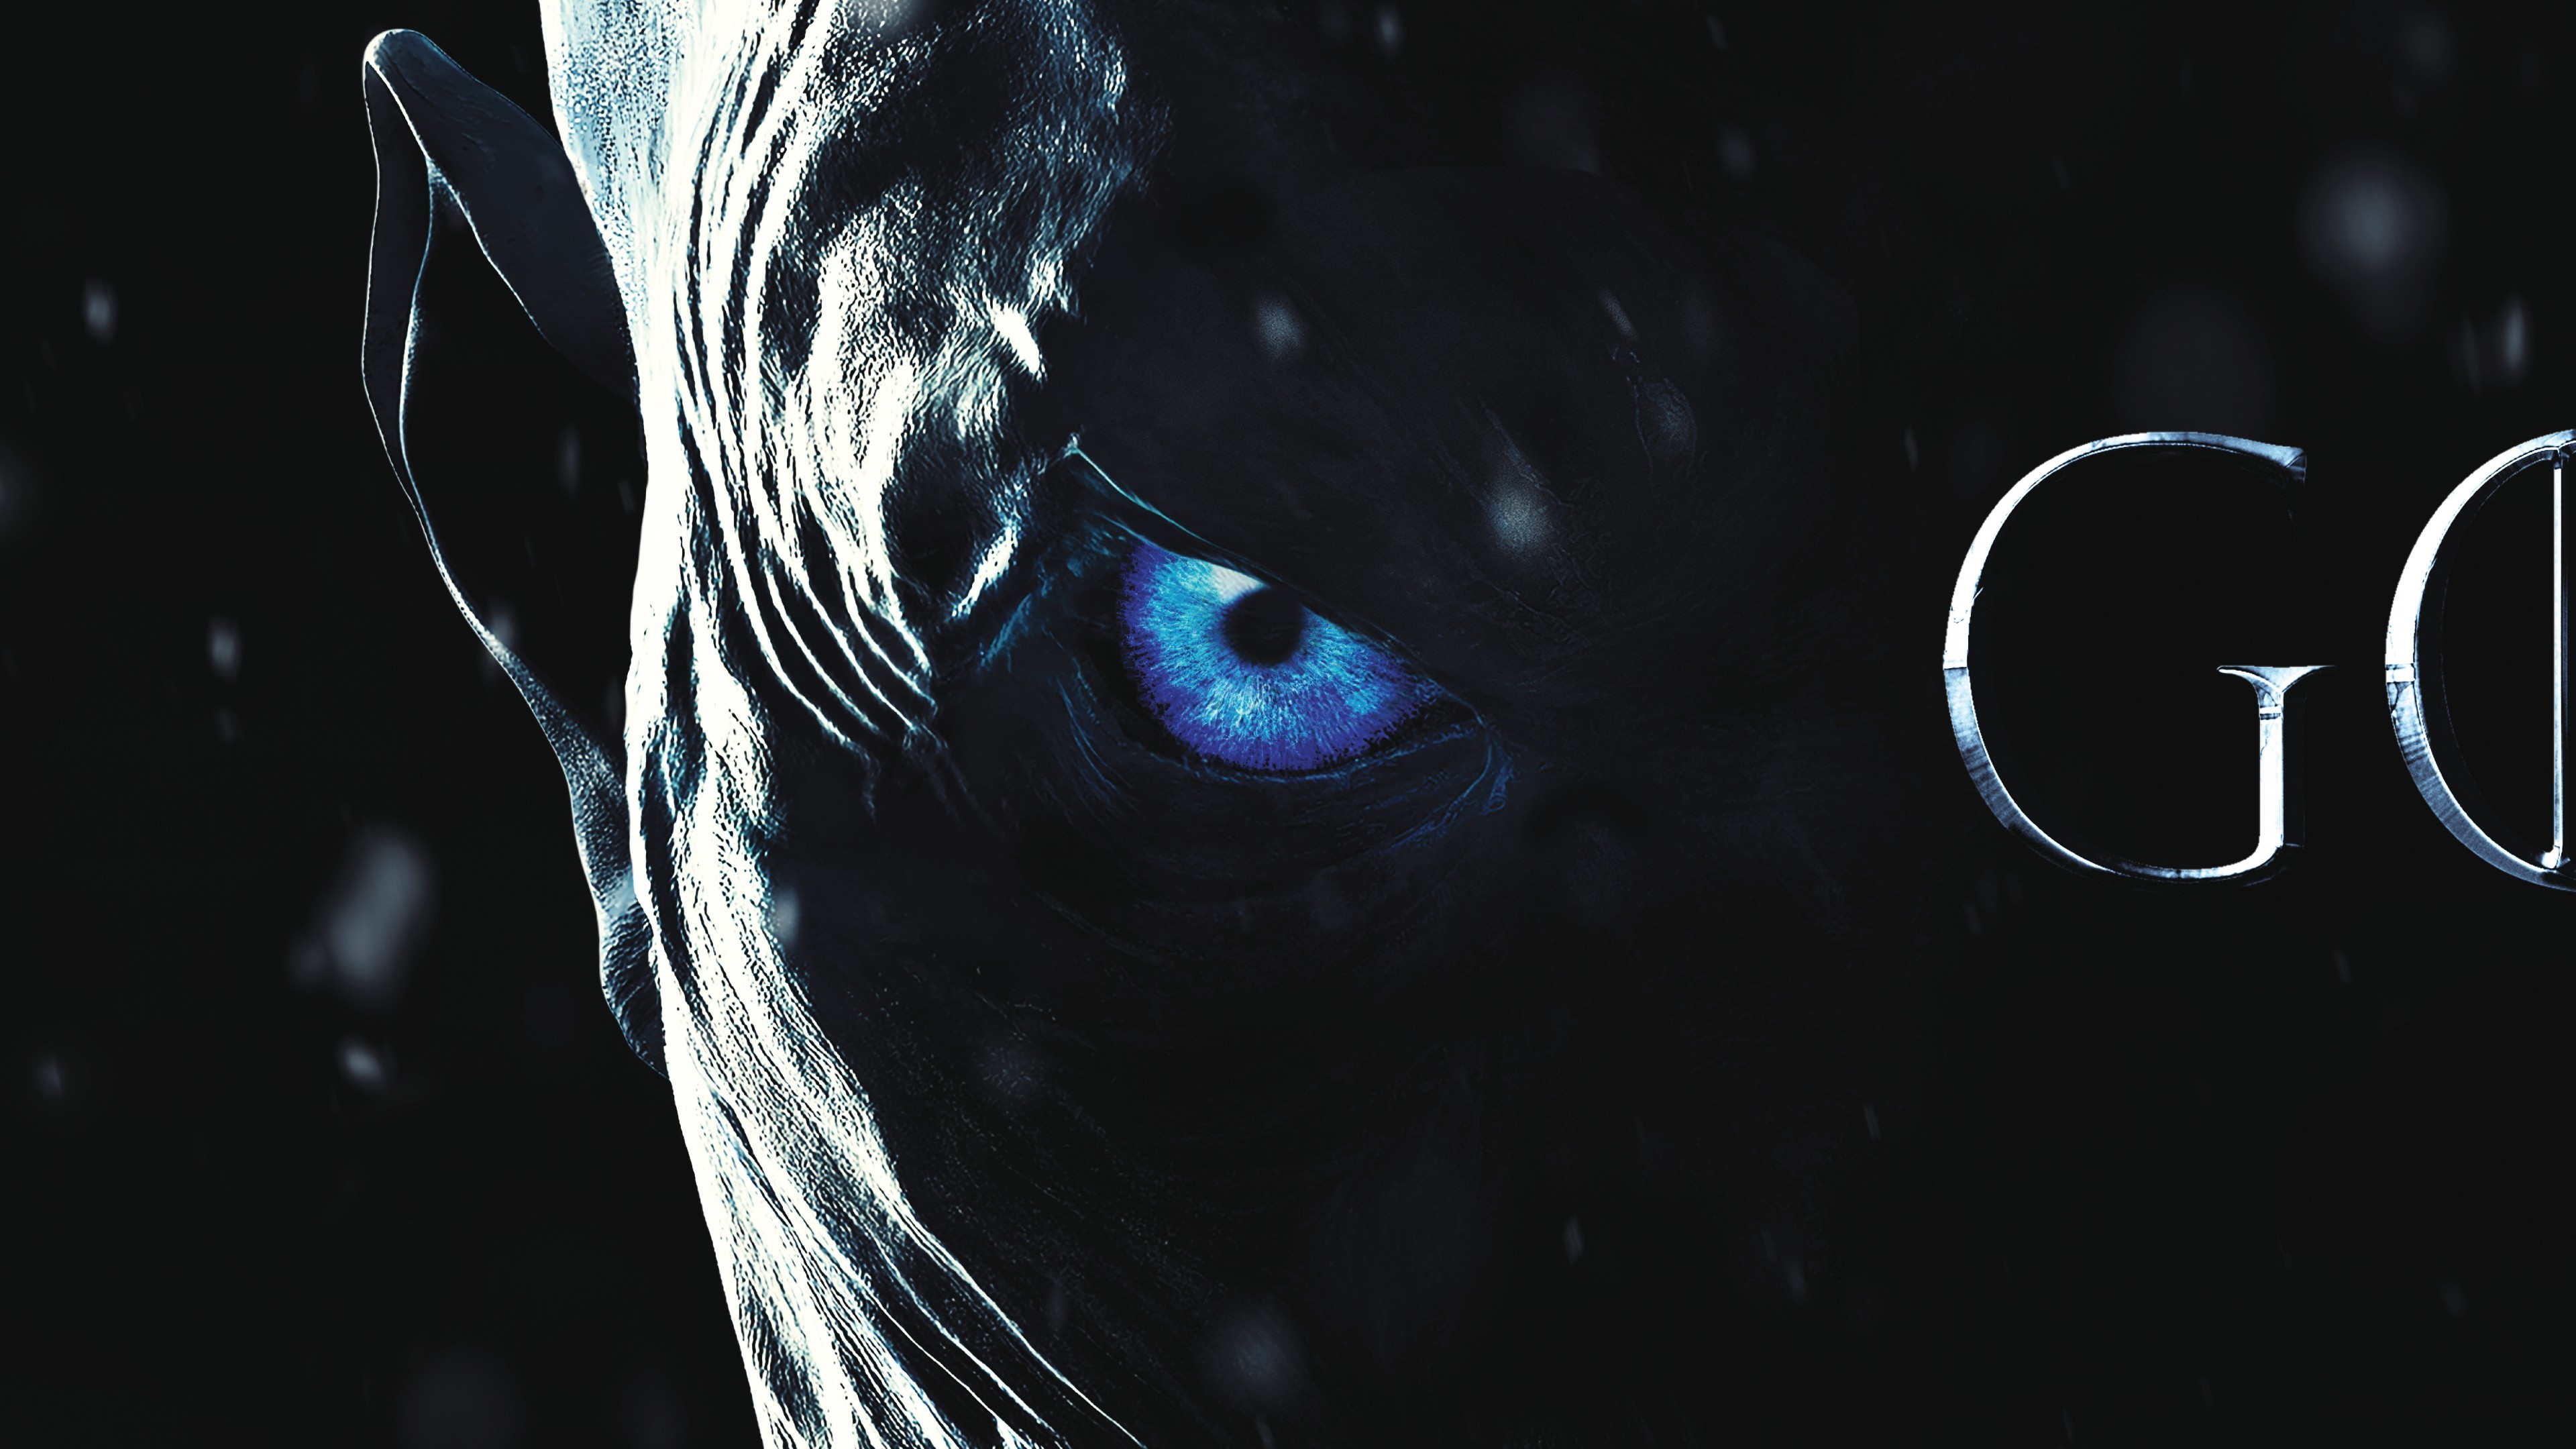 3840x2160 Game Of Thrones GIF - Find & Share on GIPHY